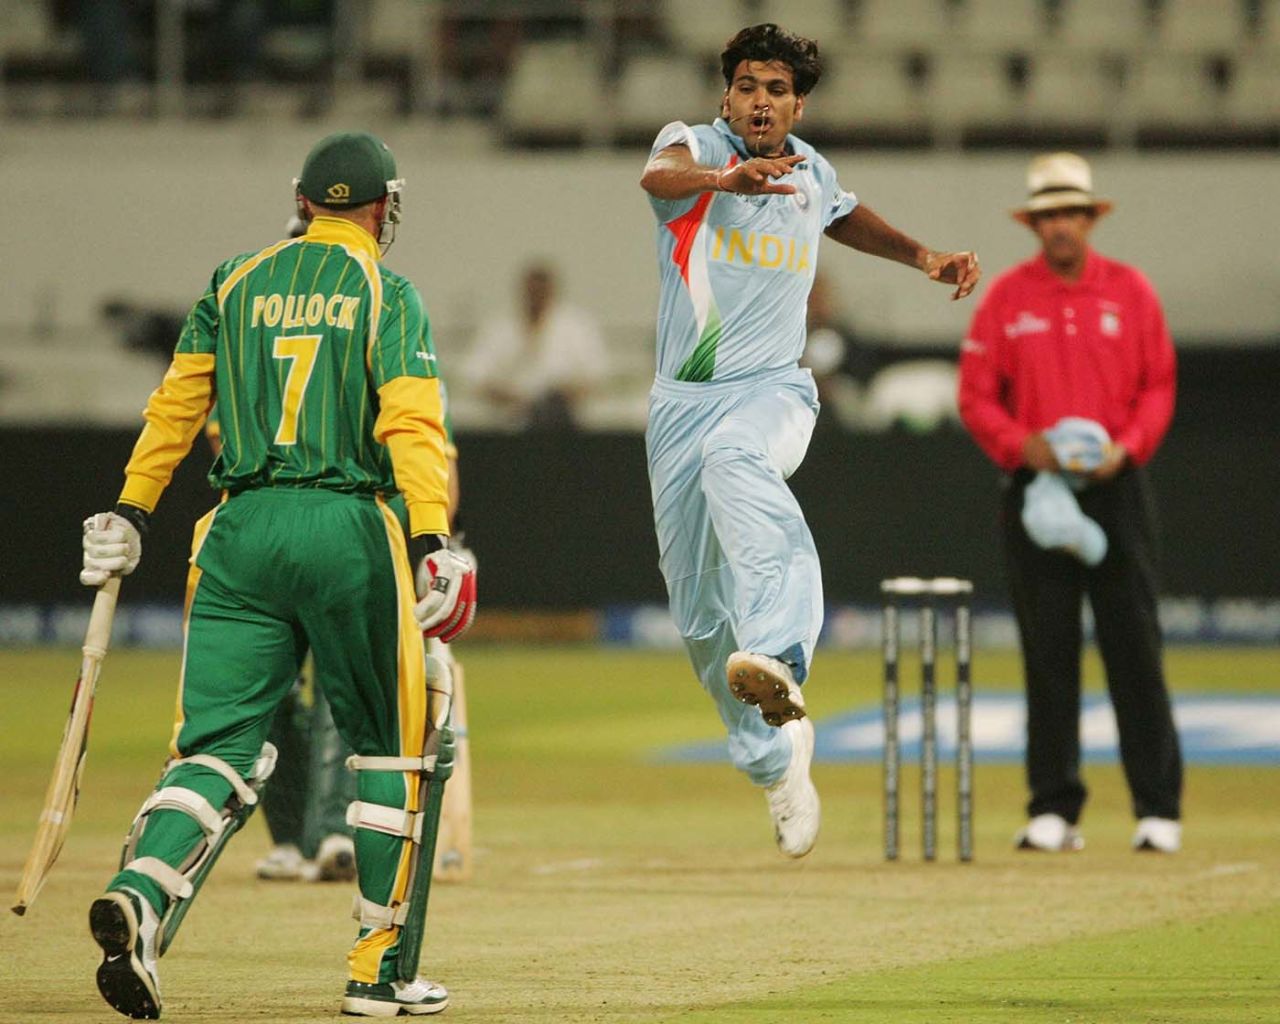 RP Singh is pumped up after dismissing Shaun Pollock, India v South Africa, Group E, ICC World Twenty20, Durban, September 20, 2007